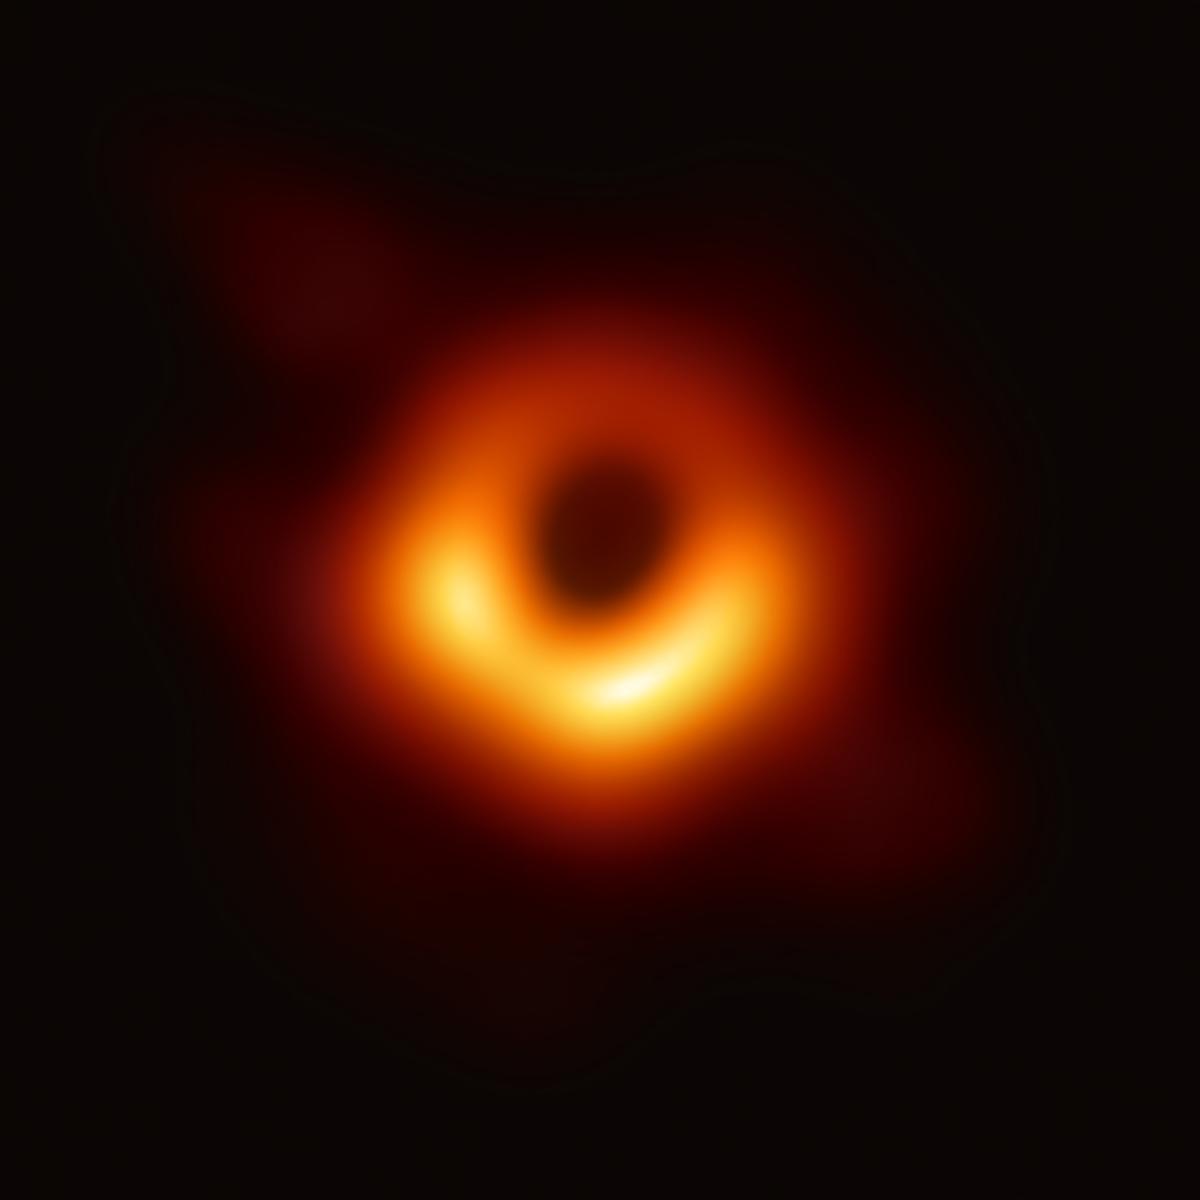 The original image of the M87 black hole created by the talented Event Horizon Telescope team